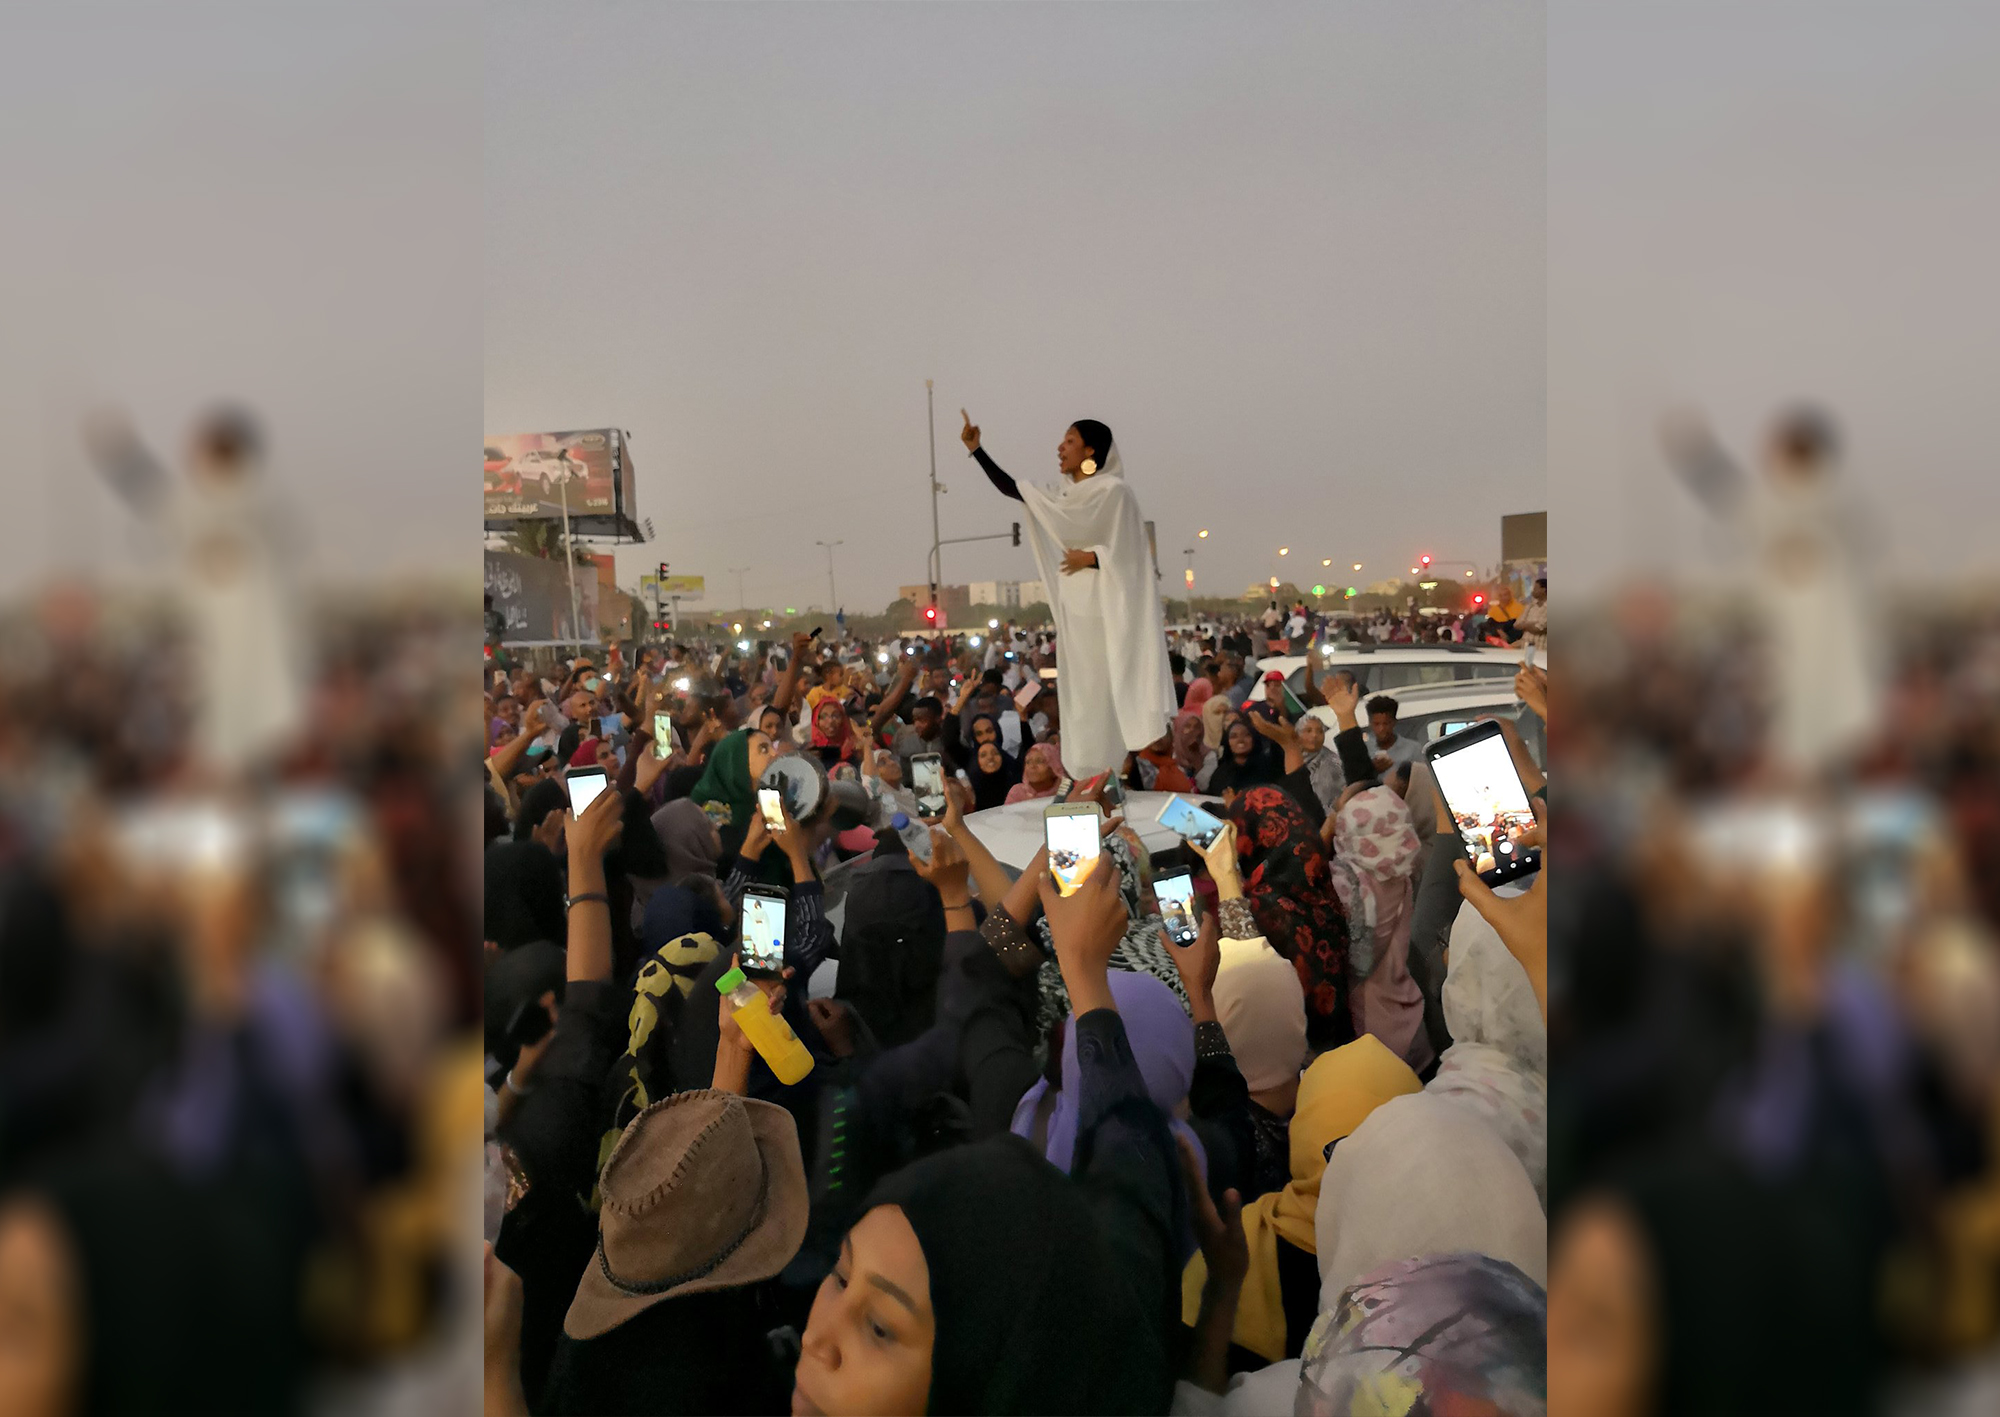 Lana Haroun's photo of 22-year-old demonstrator Alaa Salah helped raise international awareness of a protest movement that had until then been under reported